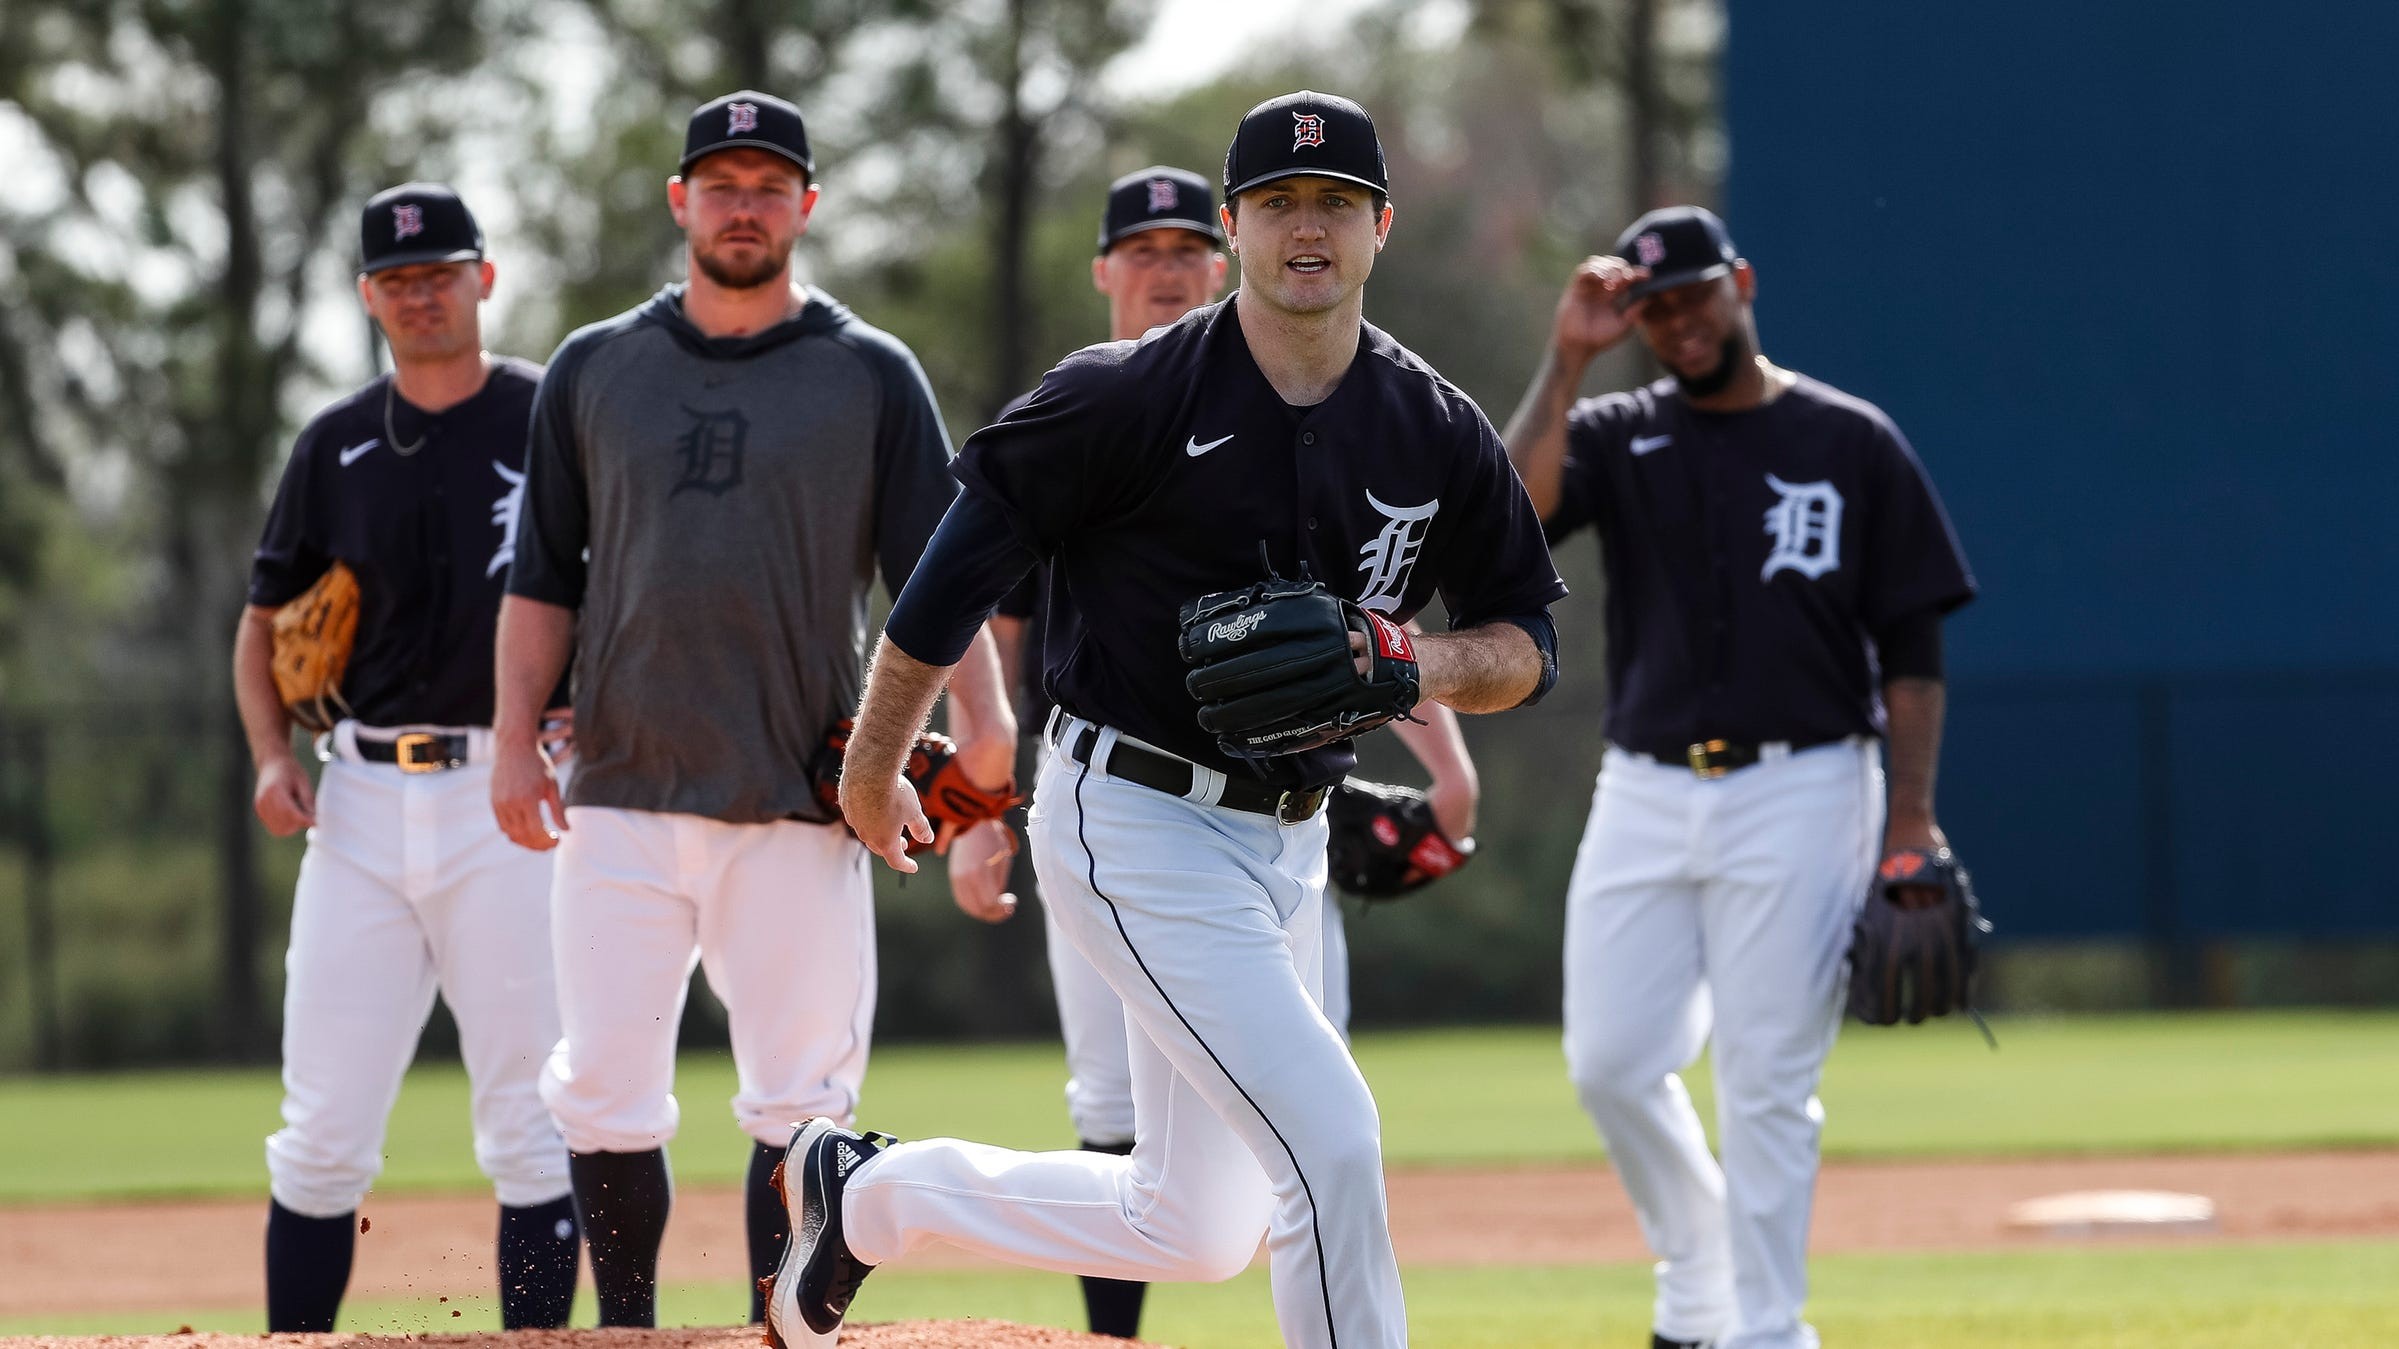 Detroit Tigers release new spring training schedule 29 games with fans